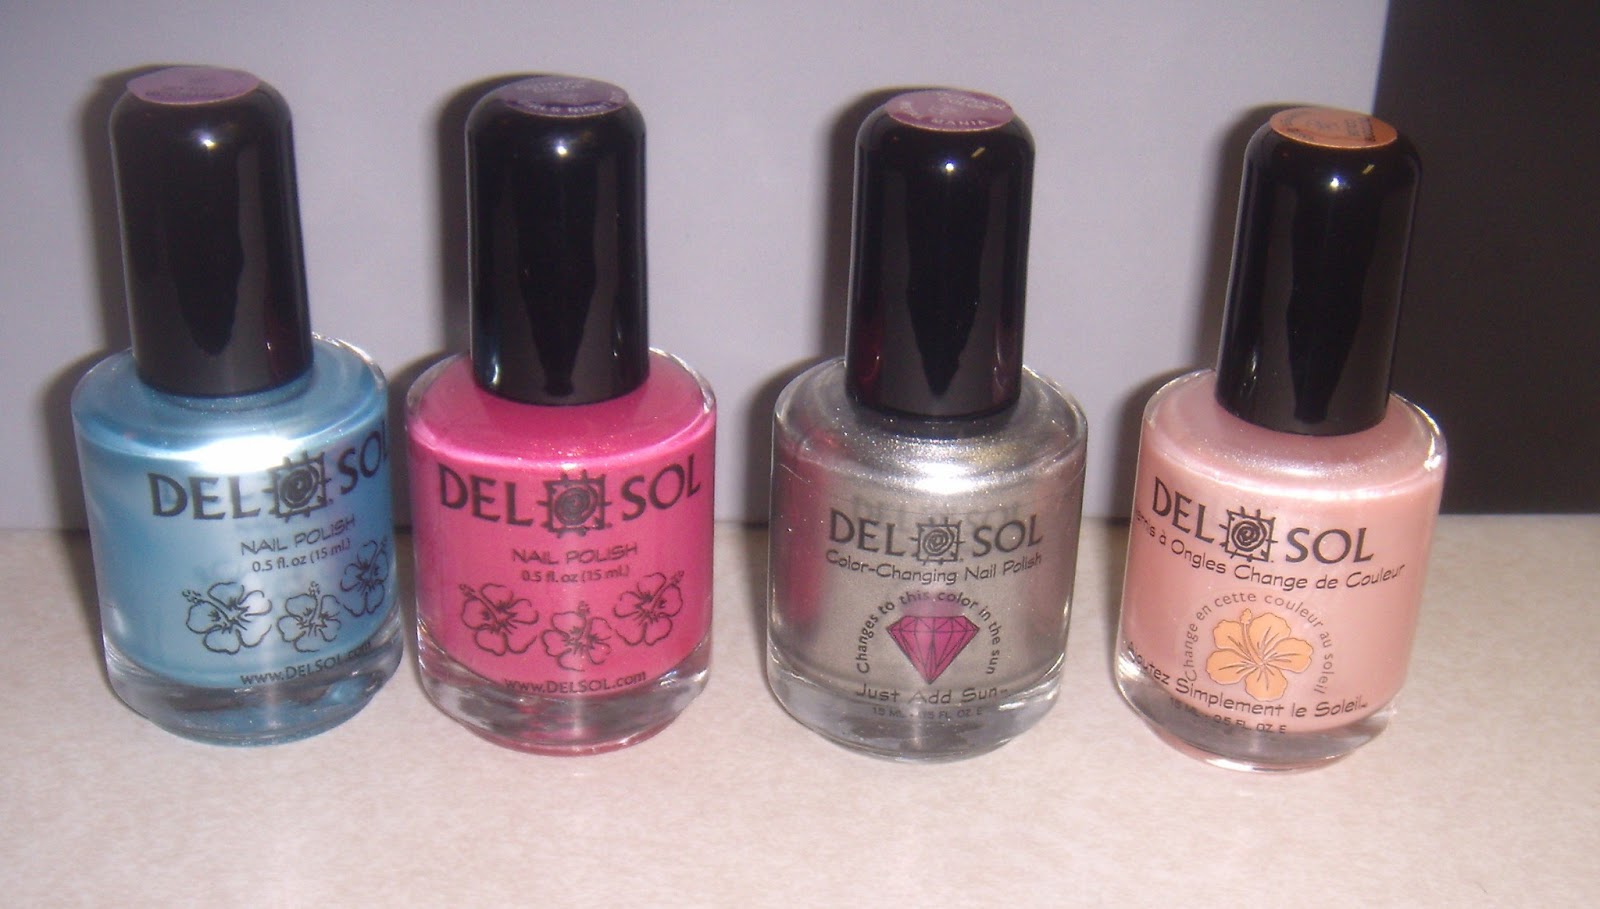 1. Del Sol Color Changing Nail Polish - wide 6